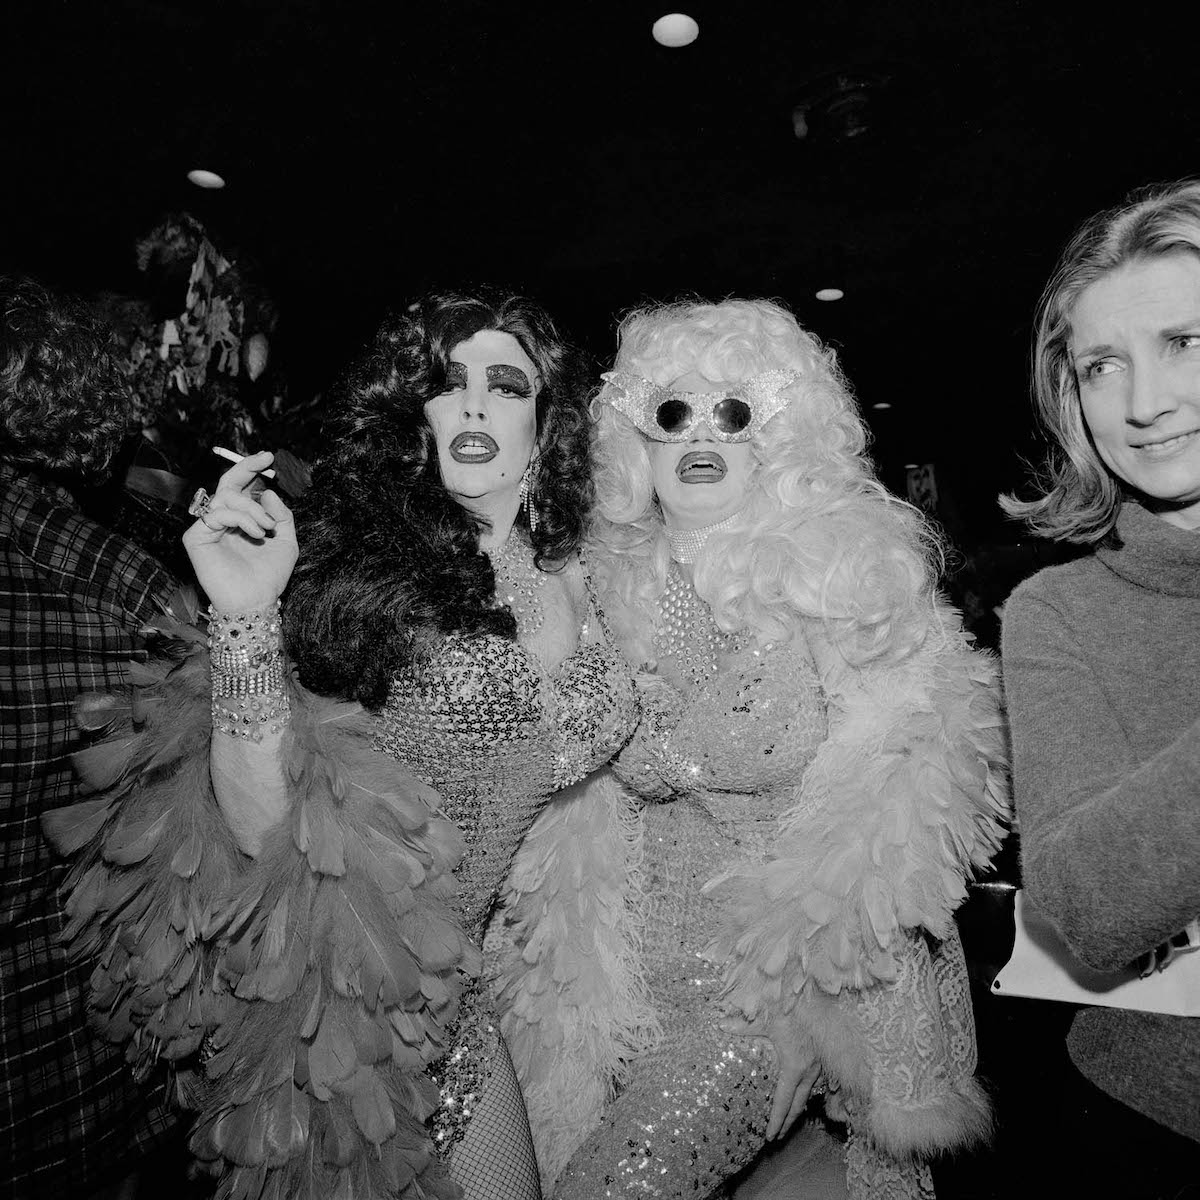 Two Queens, One Blonde, One Brunette, Coyote Hookers Masquerade Ball, Copacabana, February 14, 1977